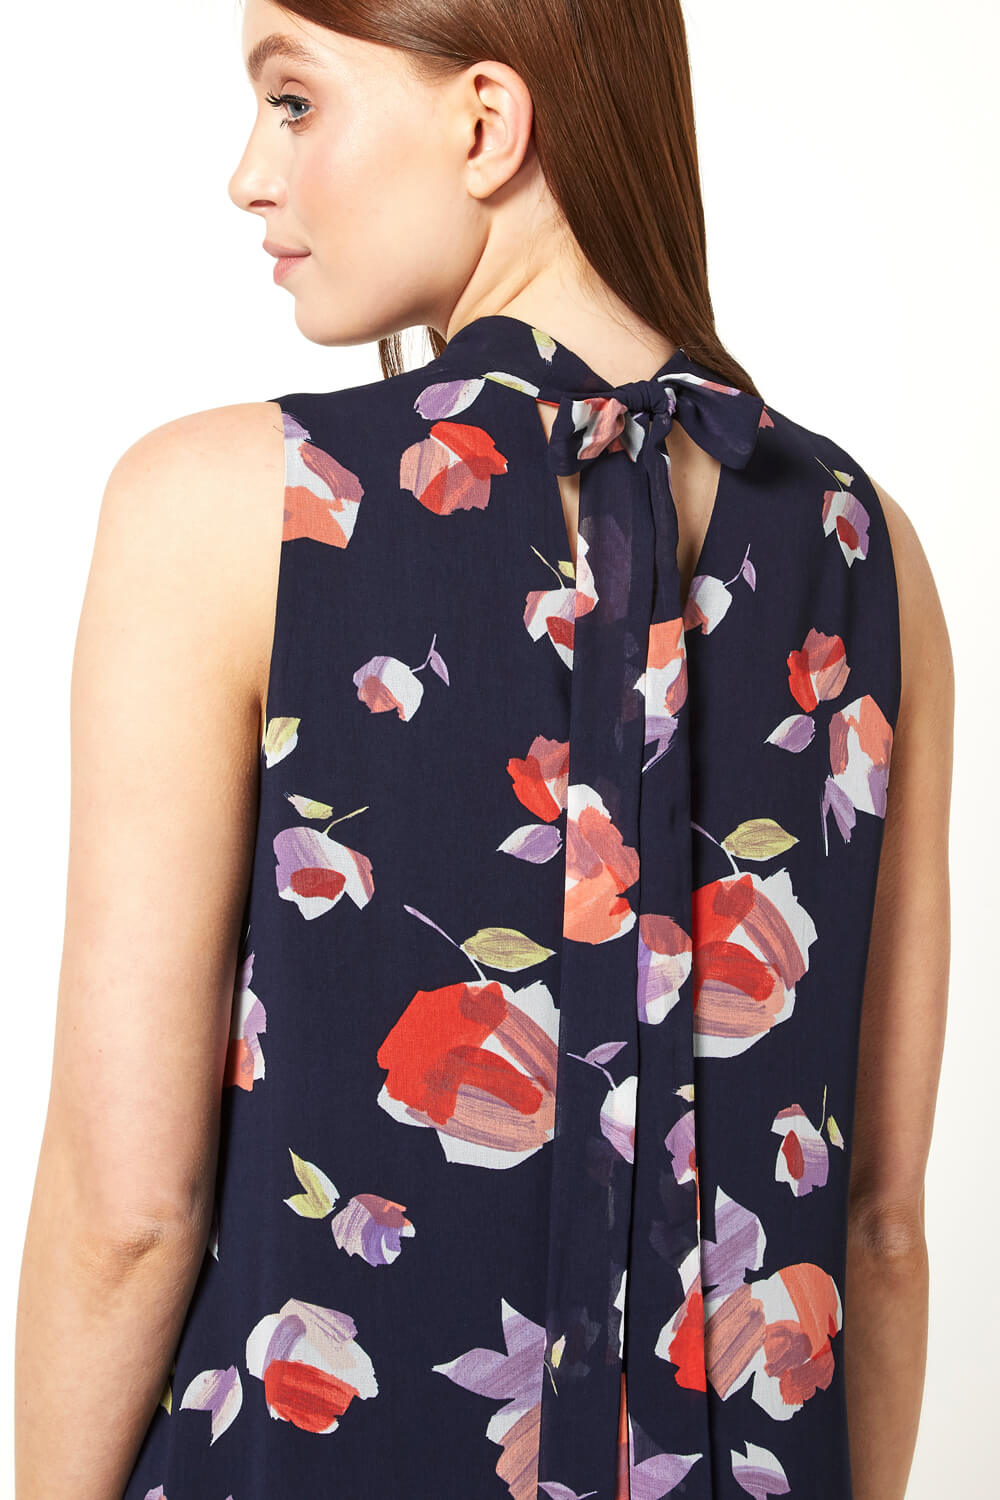 Navy  High Neck Floral Print Swing Dress, Image 4 of 5